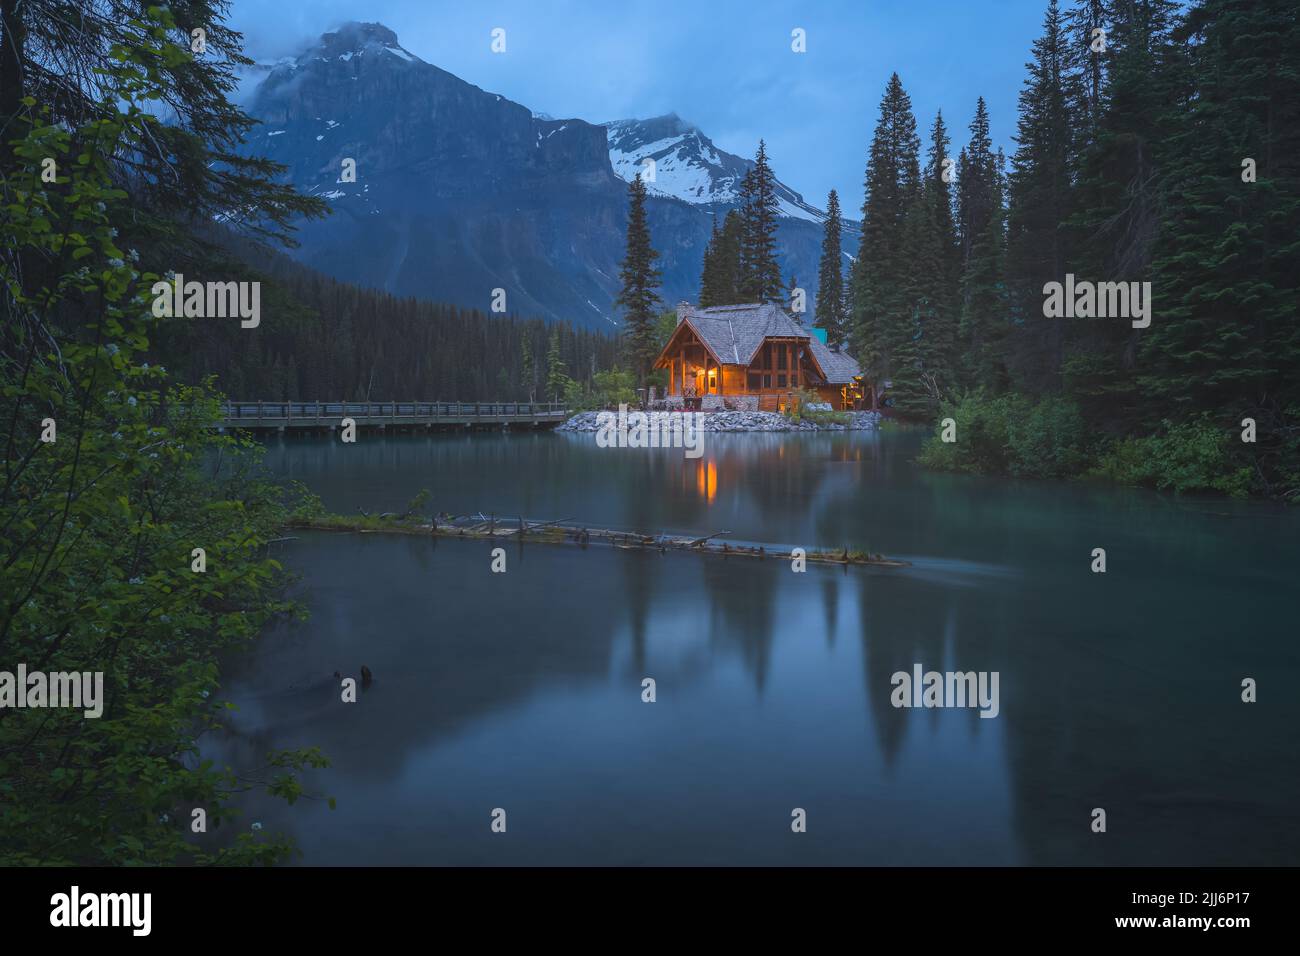 Emerald Lake, Canada - June 30, 2022: Moody, atmospheric golden light from traditional log cabin Emerald Lake Lodge at night in Rocky Mountains in Yoh Stock Photo